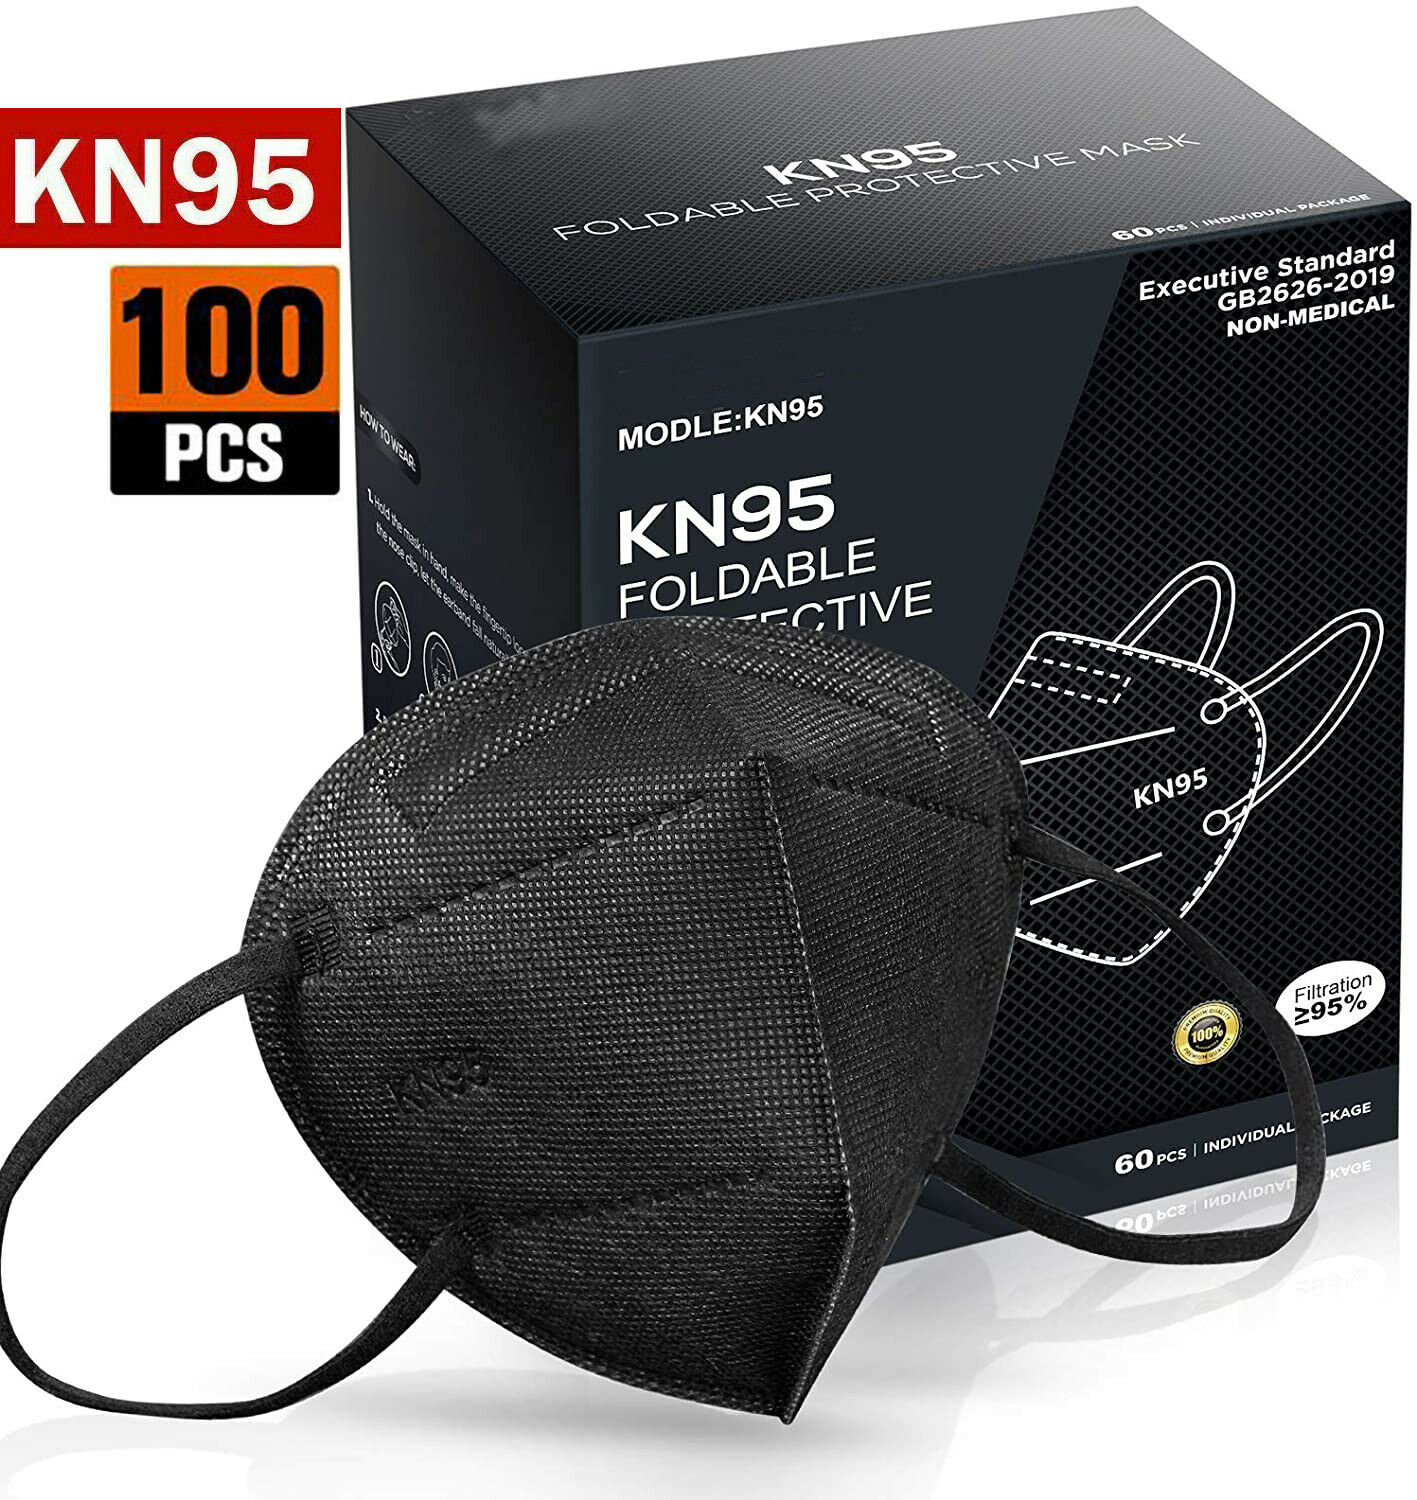 100/200 Pcs Black Color Kn95 Protective 5 Layer Face Mask Disposable K N95 Marks